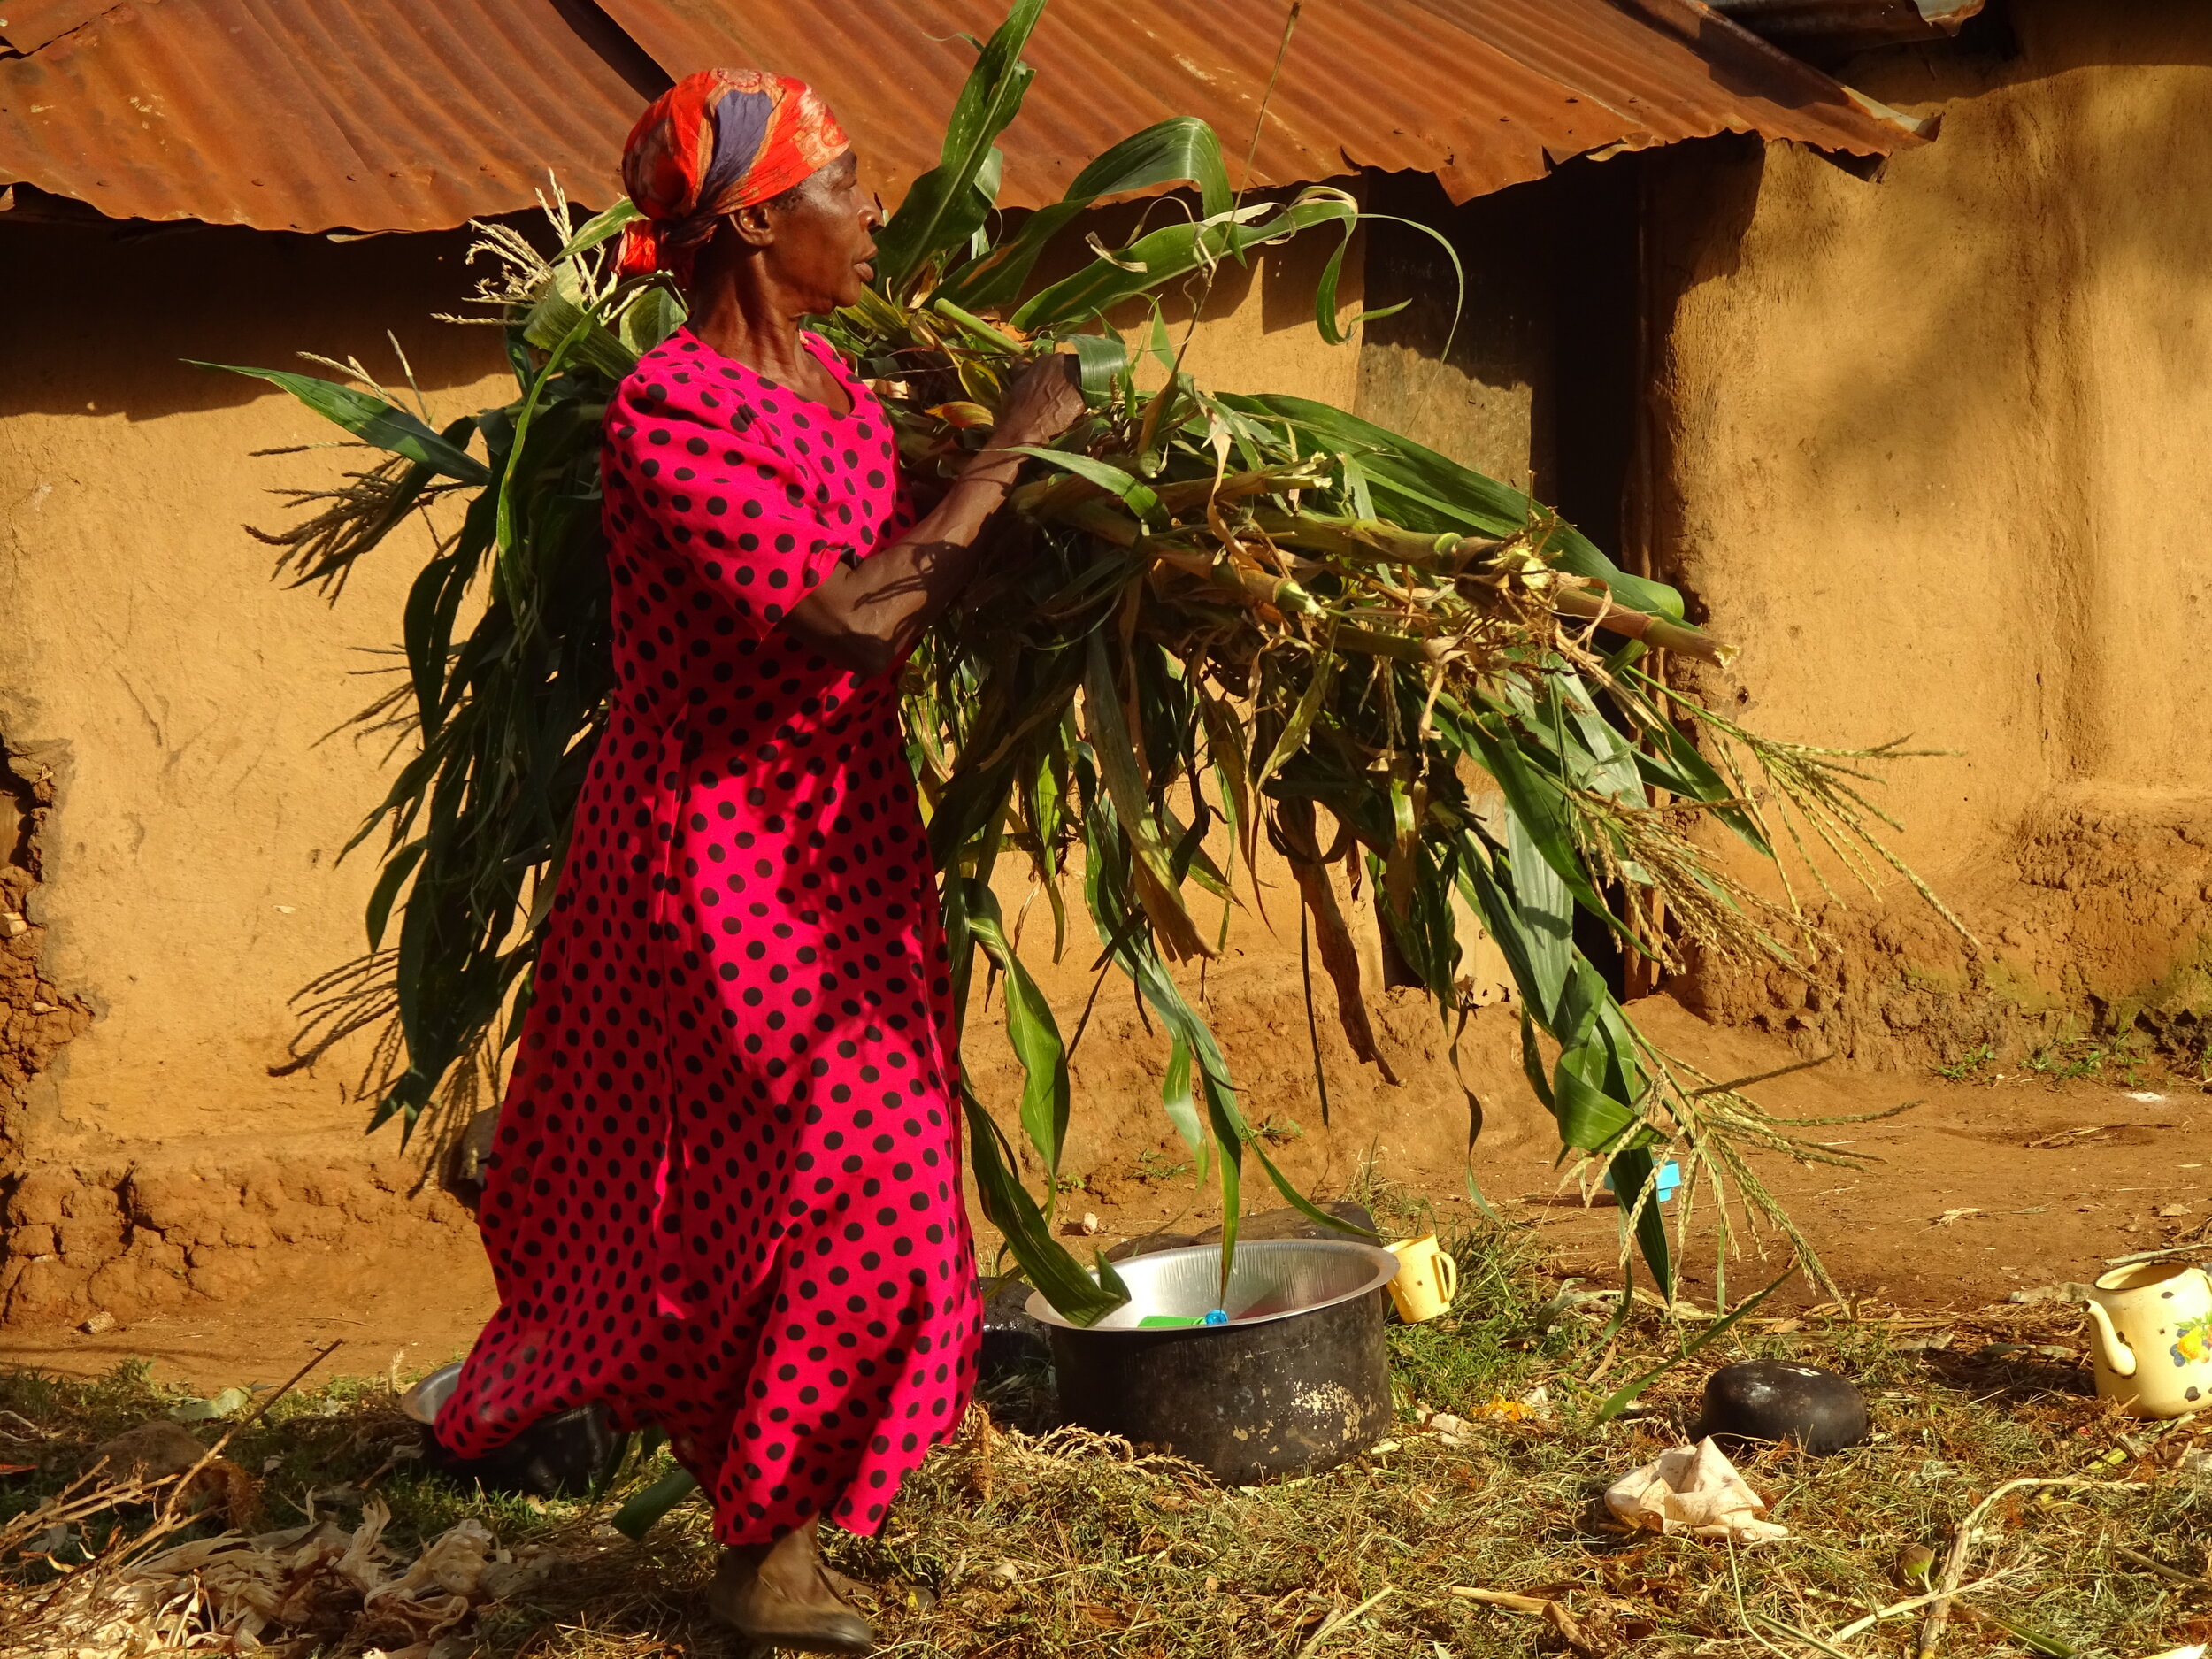 A woman carries a large armful of maize stalks in front of a house, which has mud walls and a corrugated iron roof